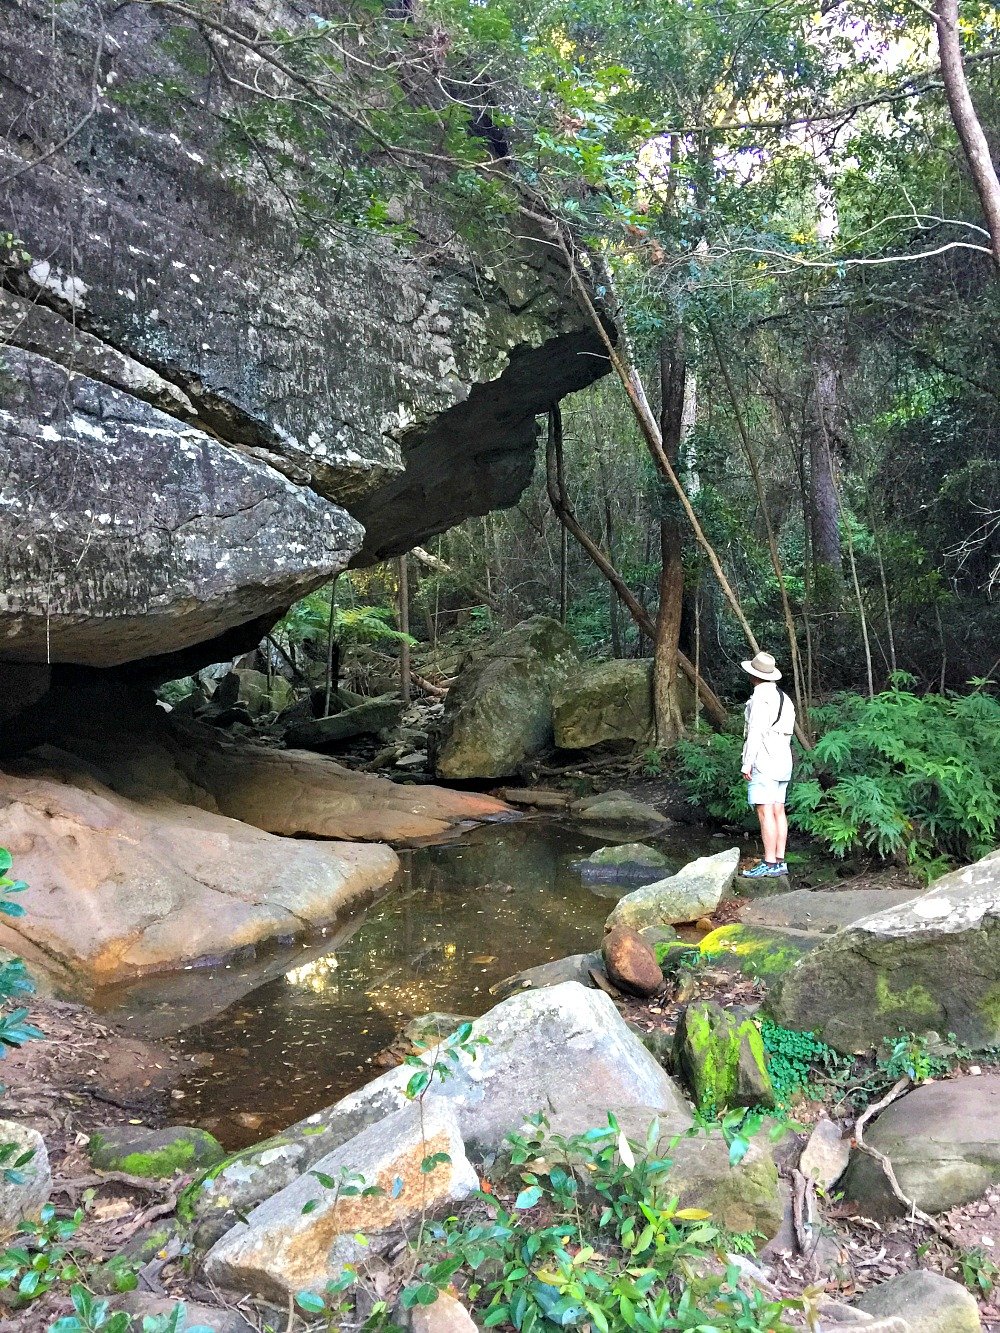 The Overhang Cania Gorge National Park